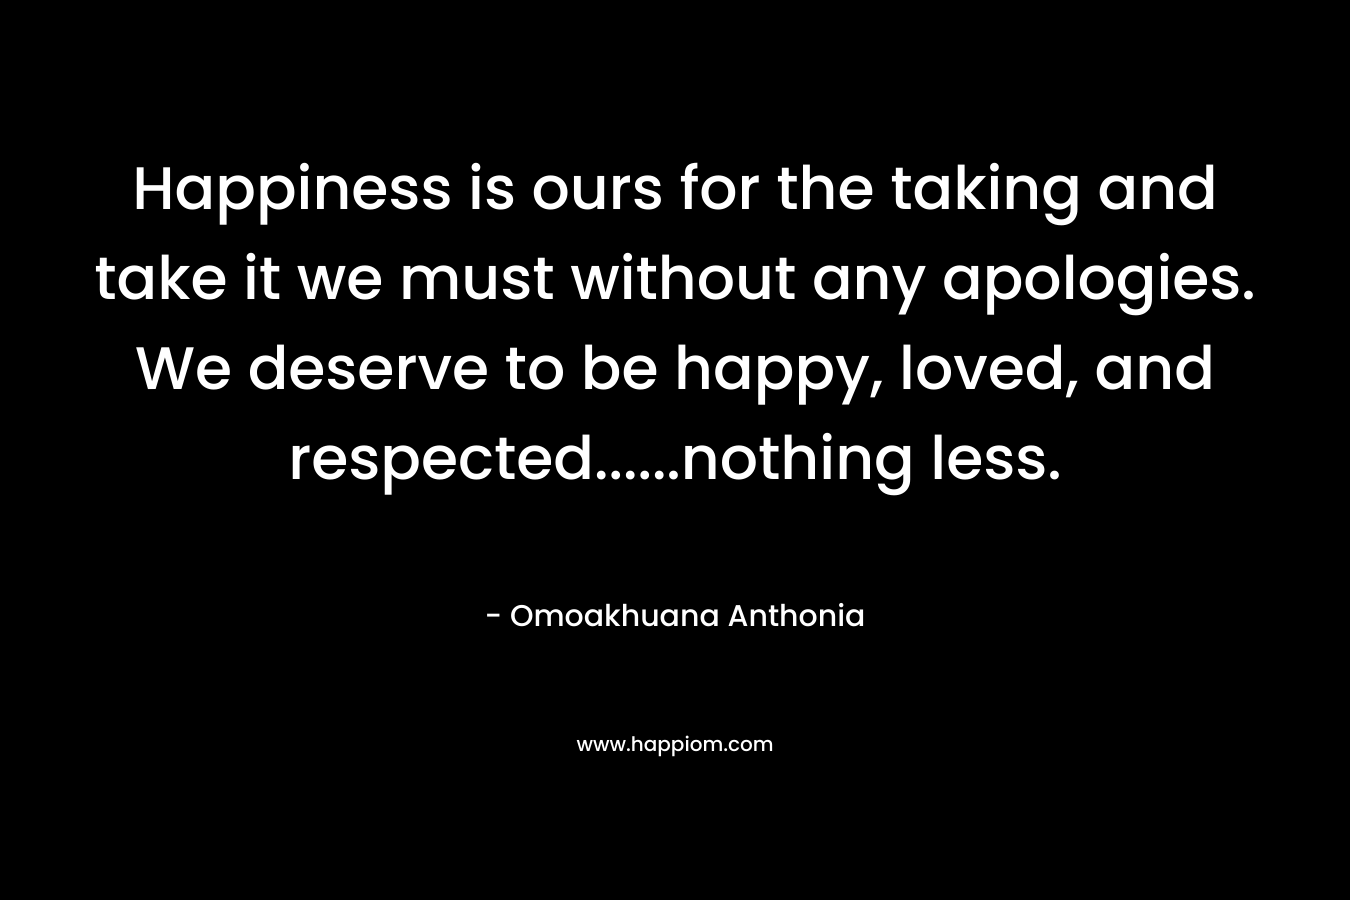 Happiness is ours for the taking and take it we must without any apologies. We deserve to be happy, loved, and respected……nothing less. – Omoakhuana Anthonia